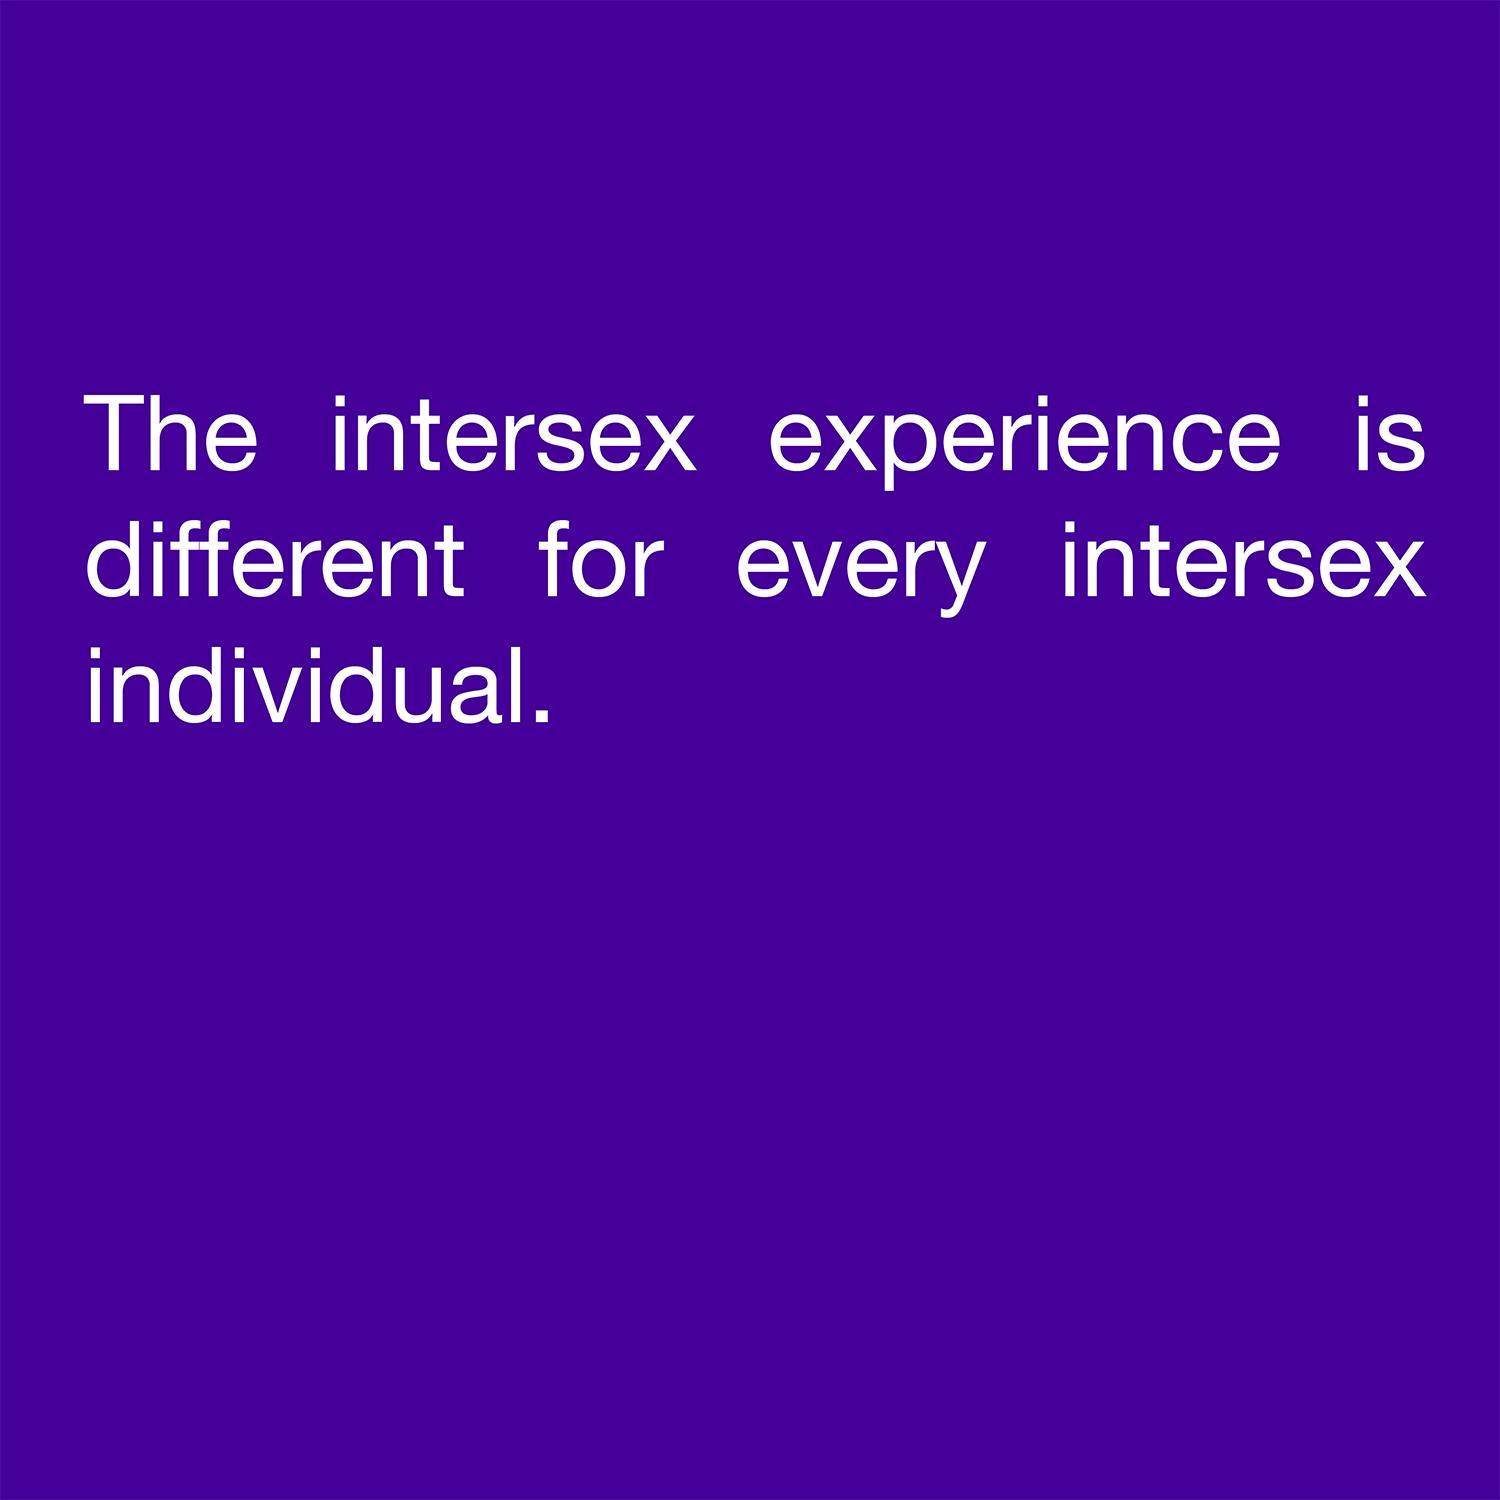  The intersex experience is different for every intersex individual. 